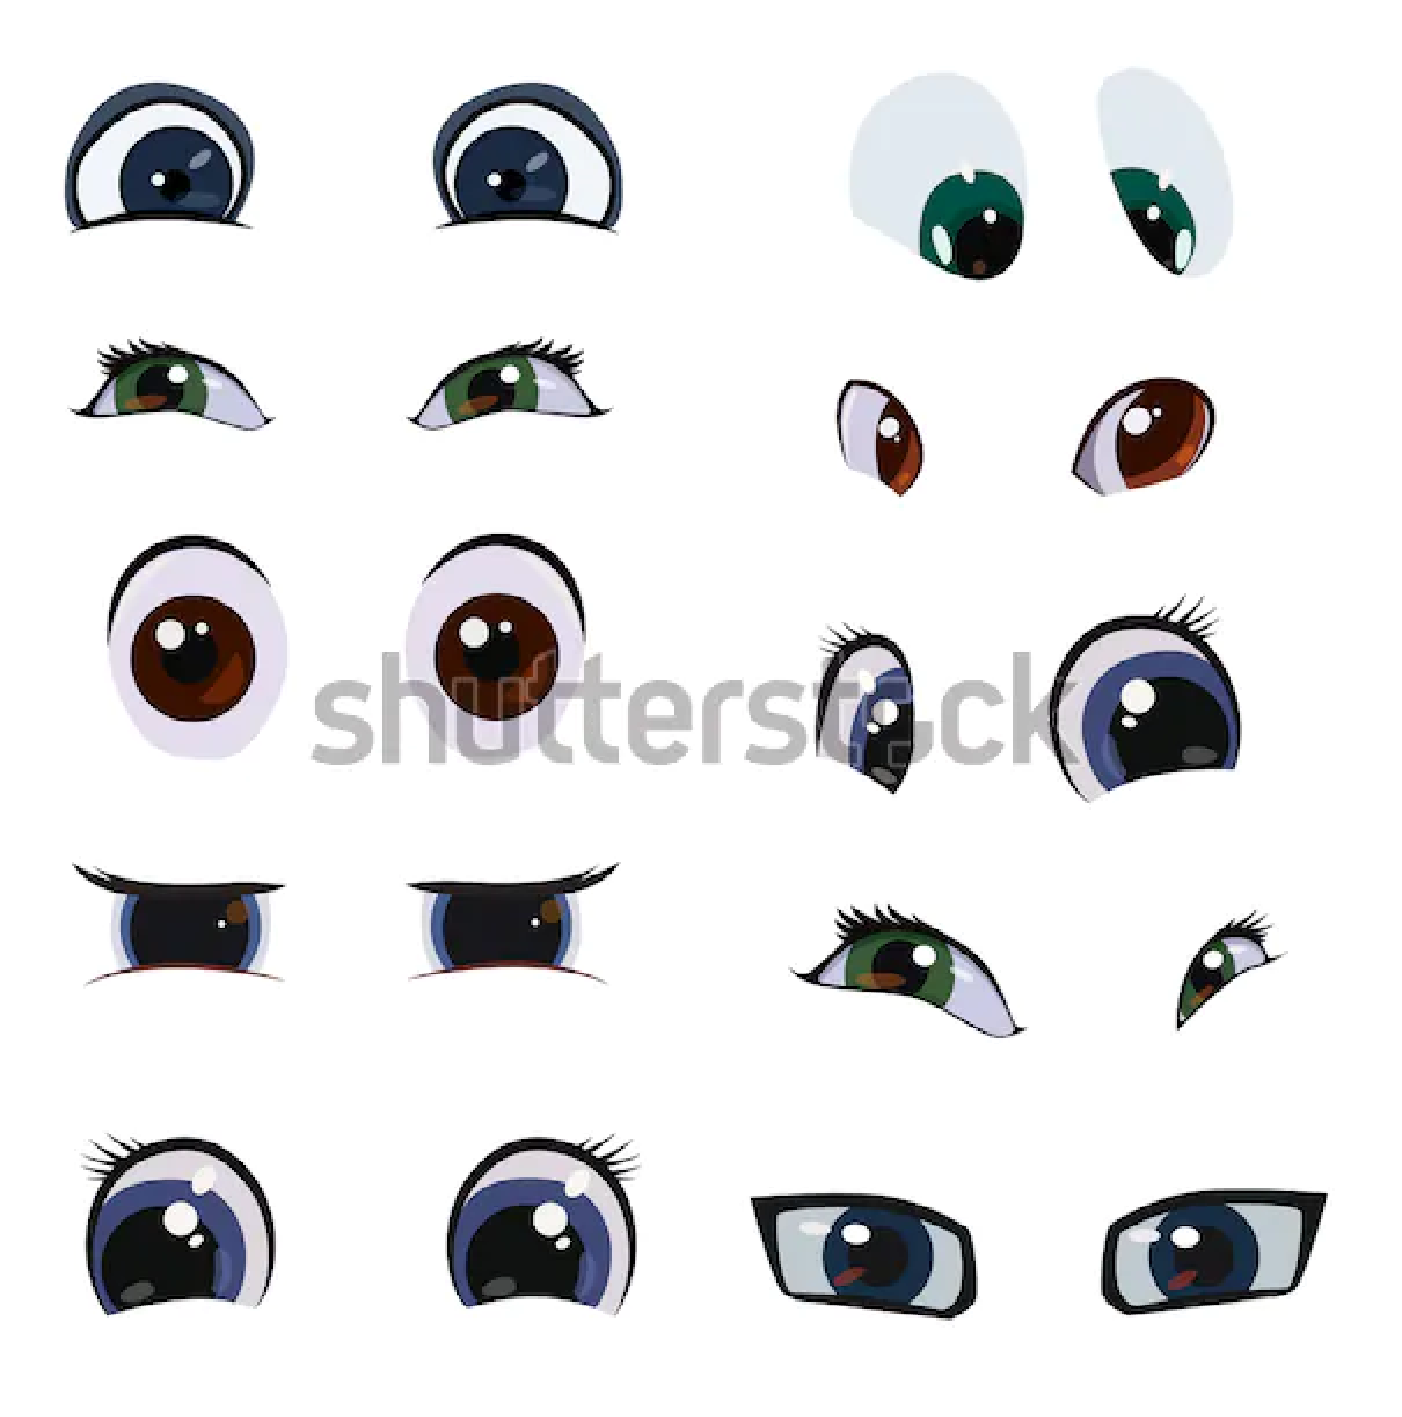 Free Vector Stock - Cartoon eyes of animals and people characters | Vector  Stock Wiki | Fandom